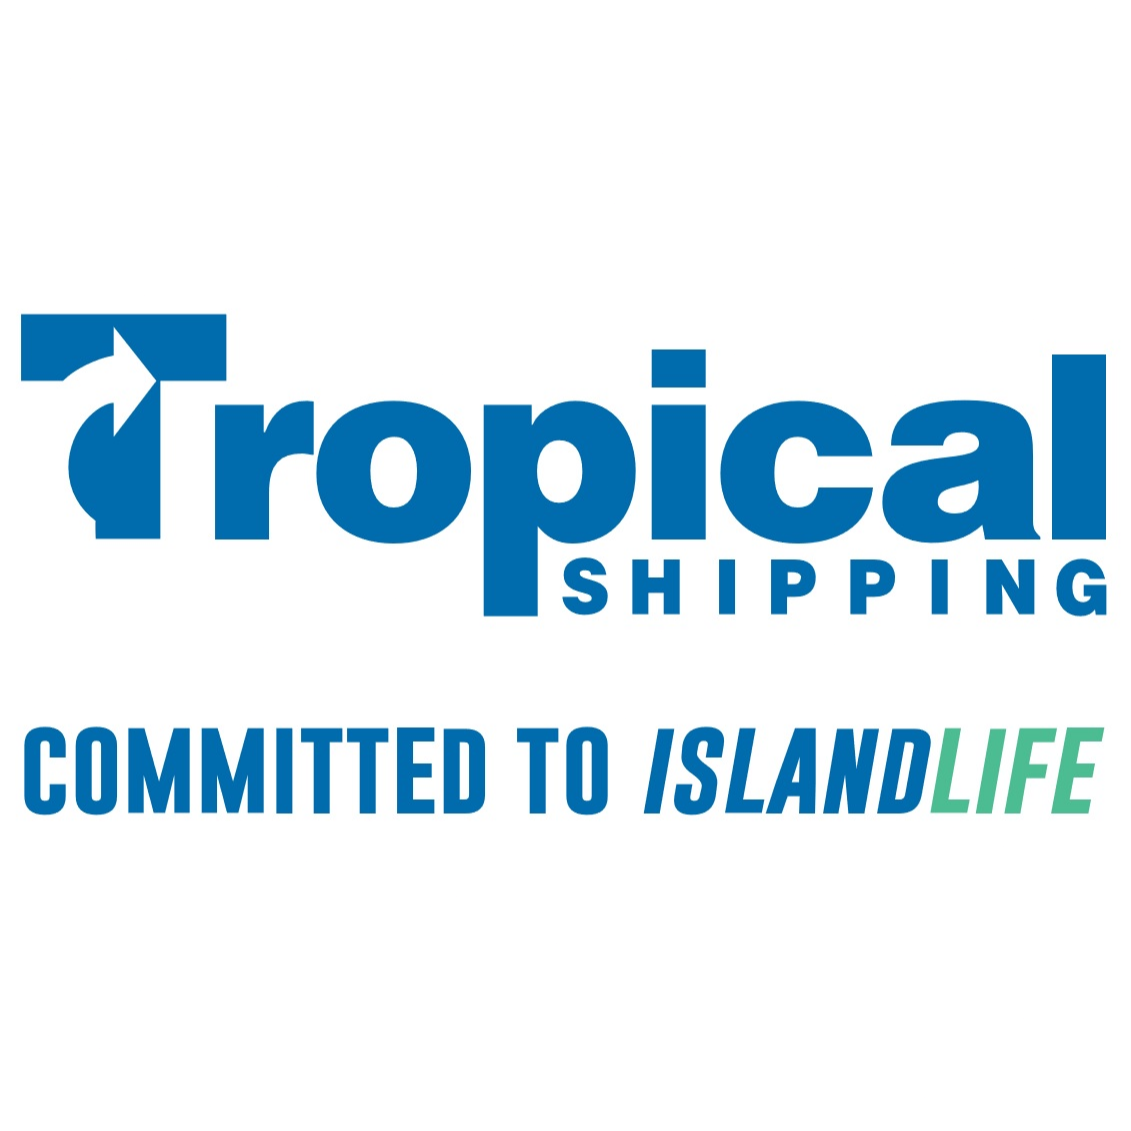 TROPICAL SHIPPING